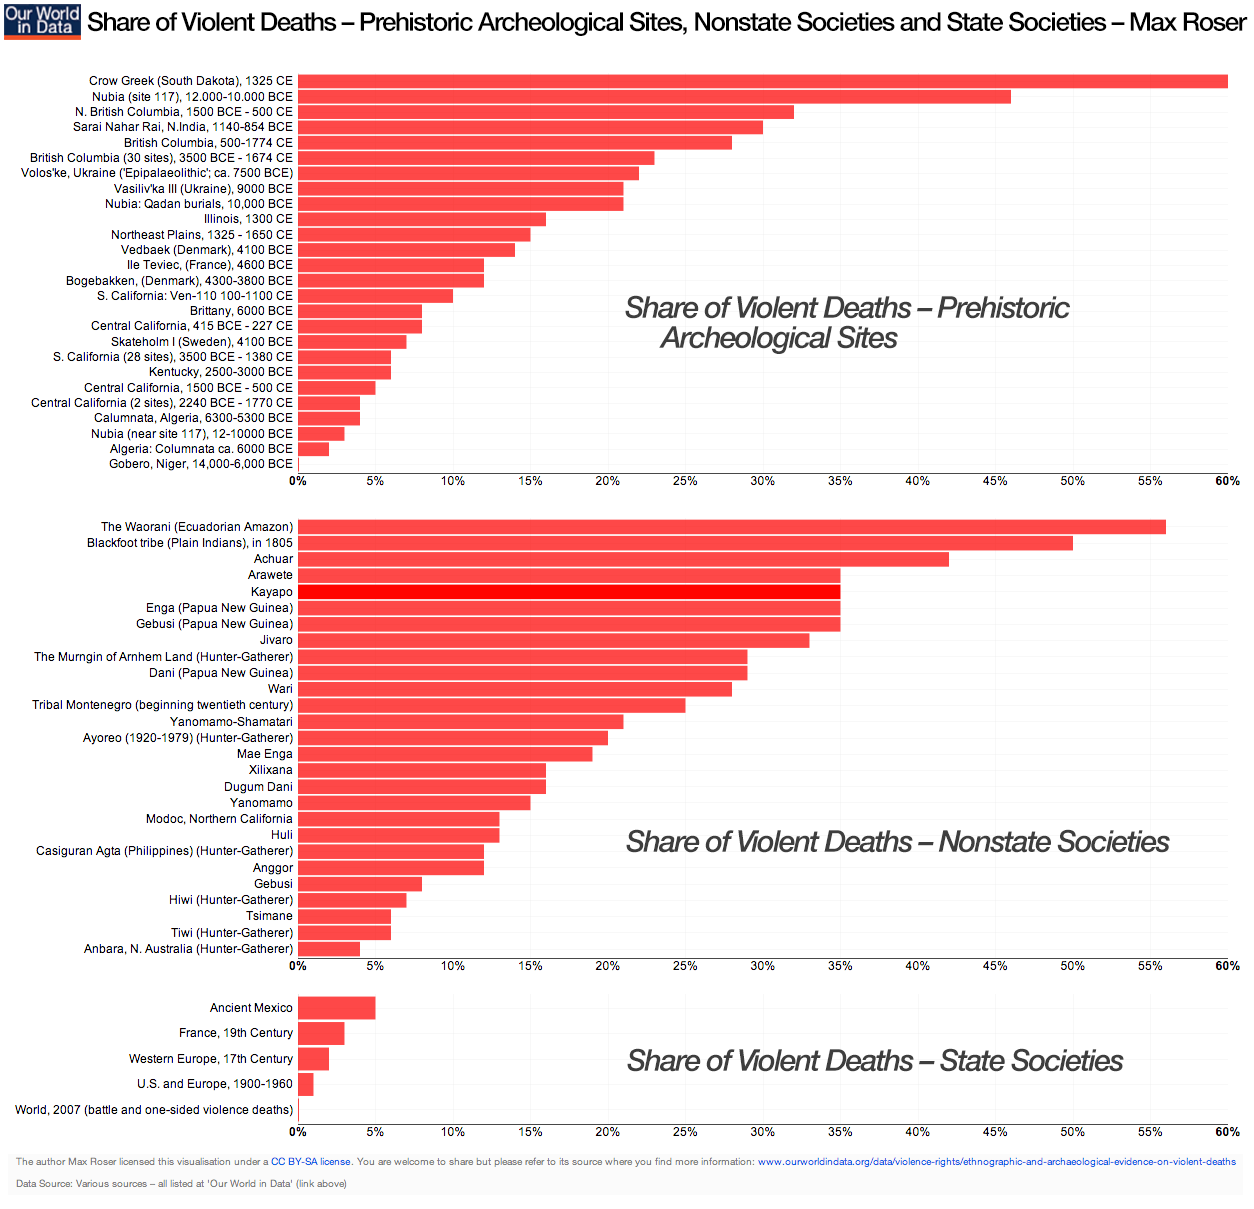 ourworldindata_share-of-violent-deaths_prehistoric-archeological-sites-nonstate-societies-and-state-societies_max-roser.png